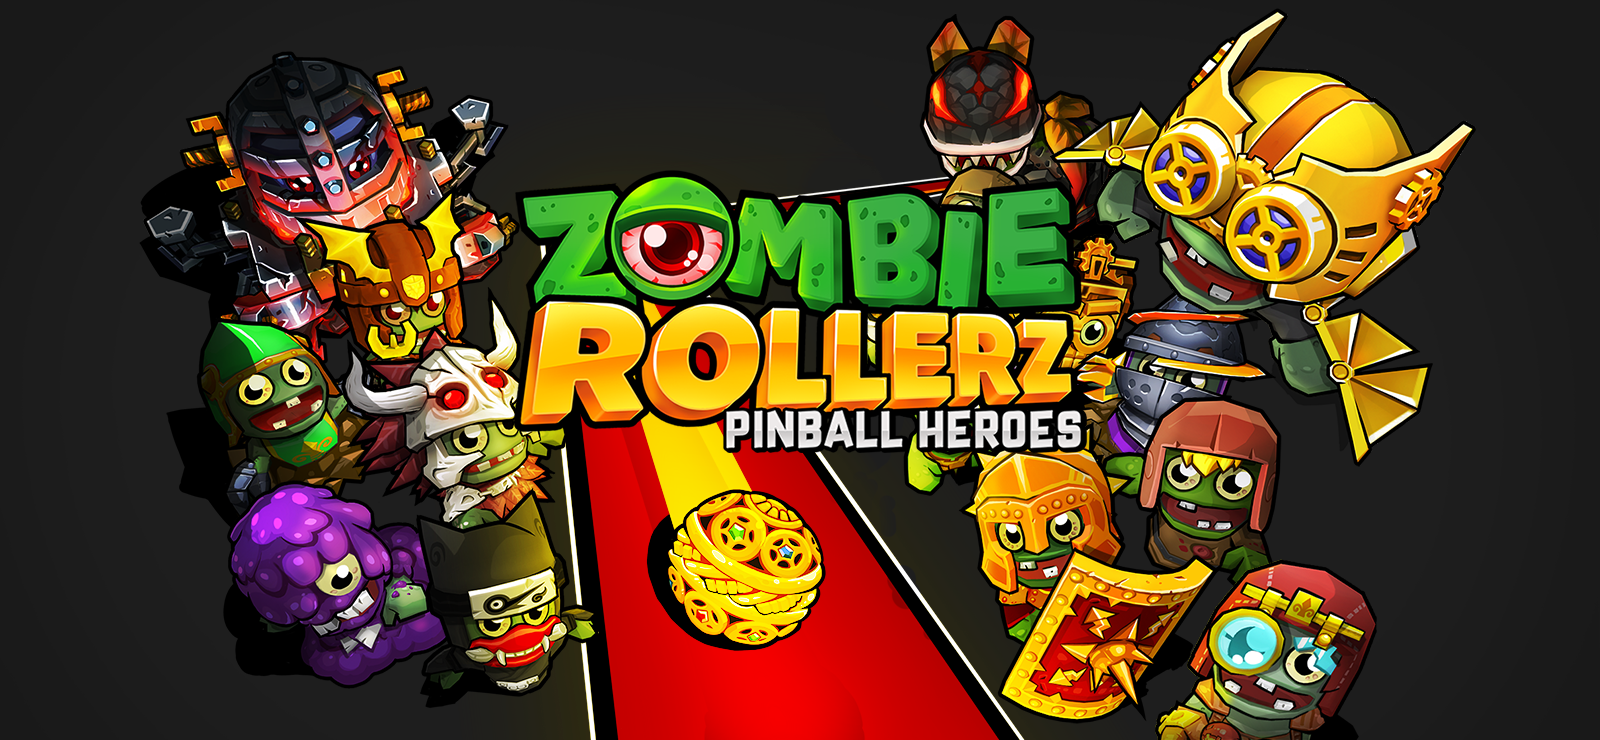 Zombie Rollerz: Pinball Heroes instal the new